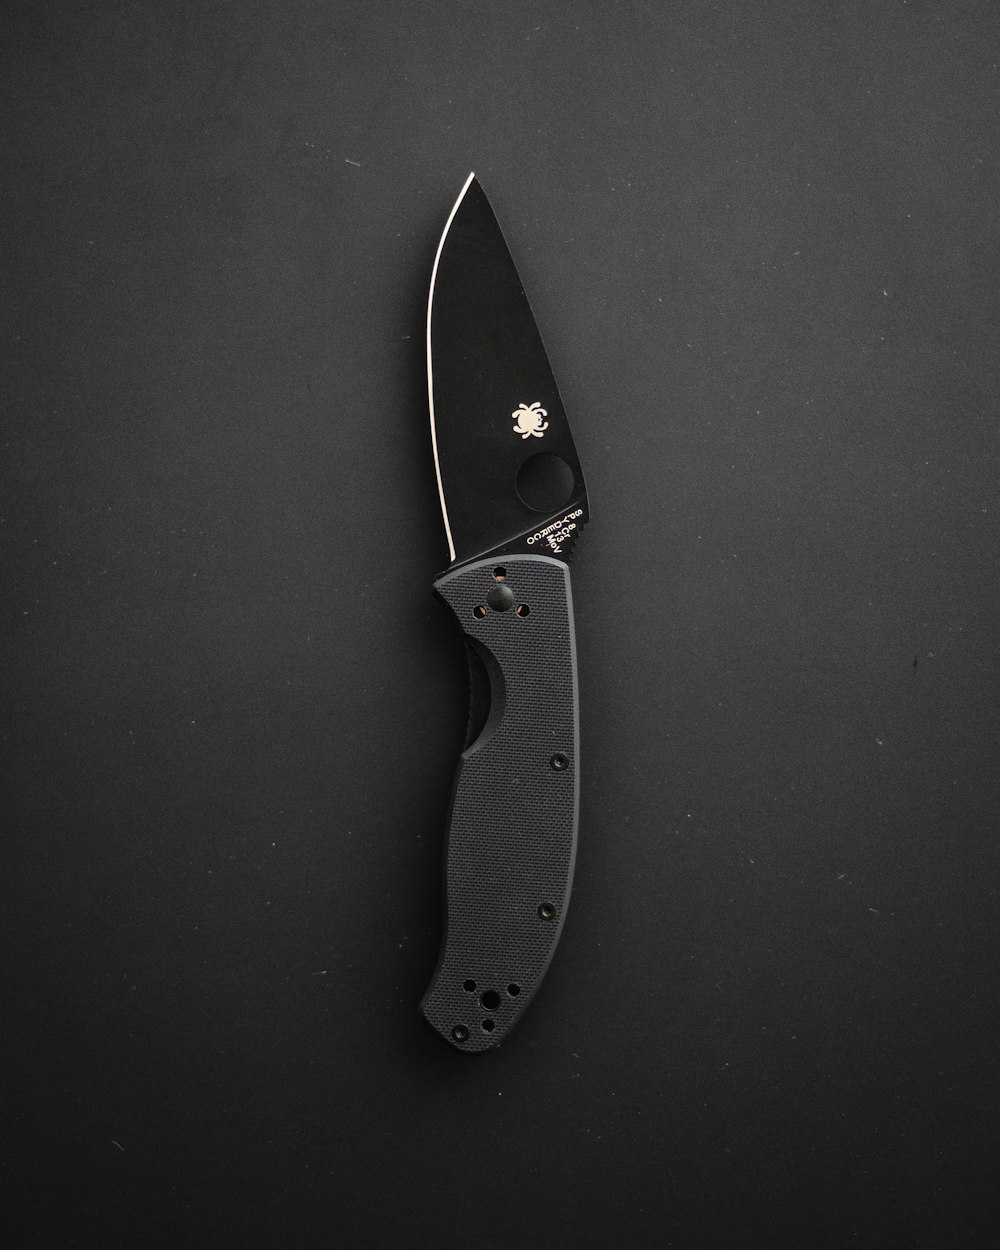 a knife with a black handle on a black surface